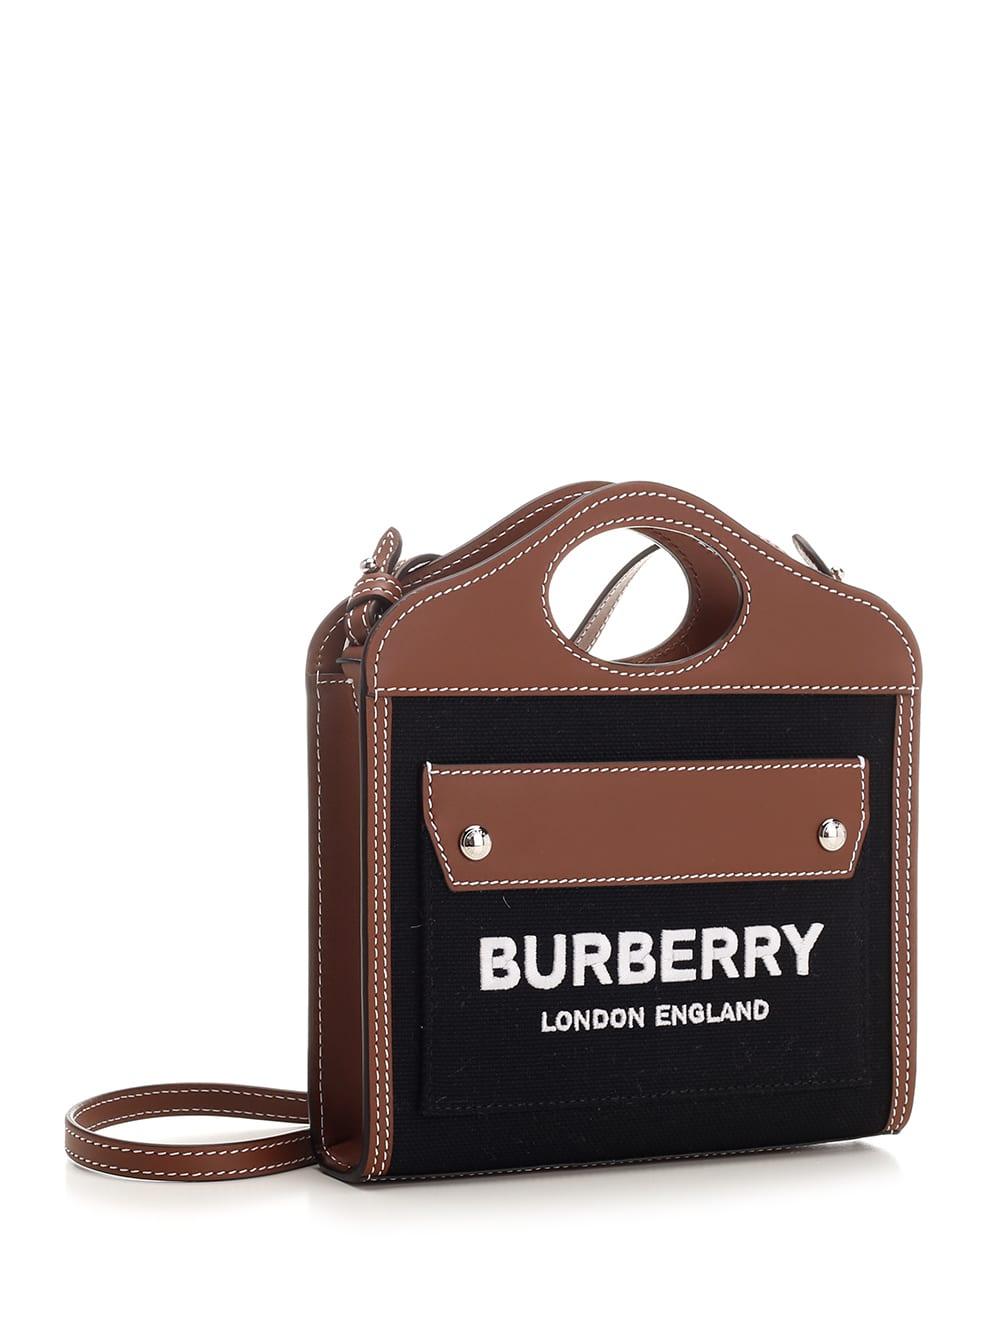 Burberry two-tone small pocket bag in smooth calf leather, natural